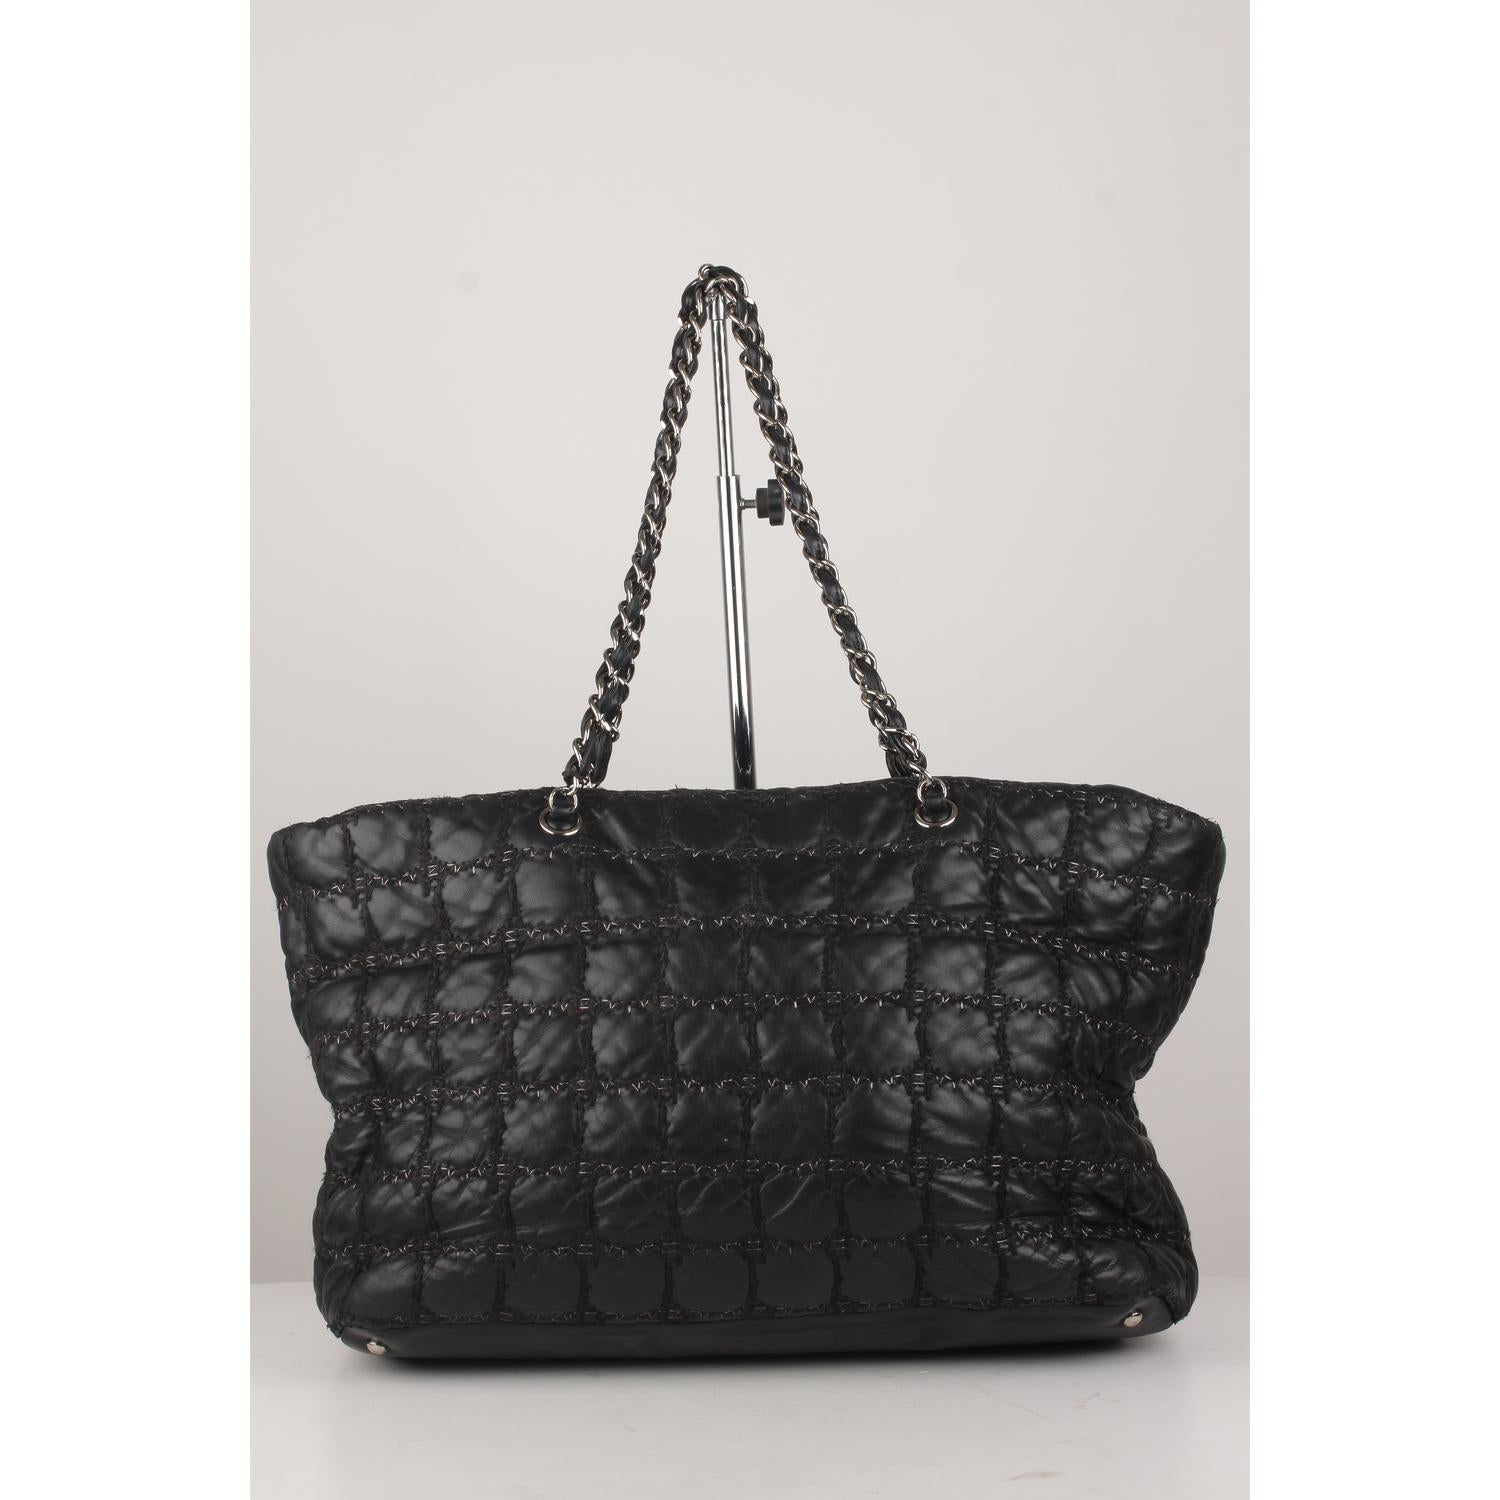 Women's Chanel Black Tweed Square Stitch Quilted Leather Large Tote Bag